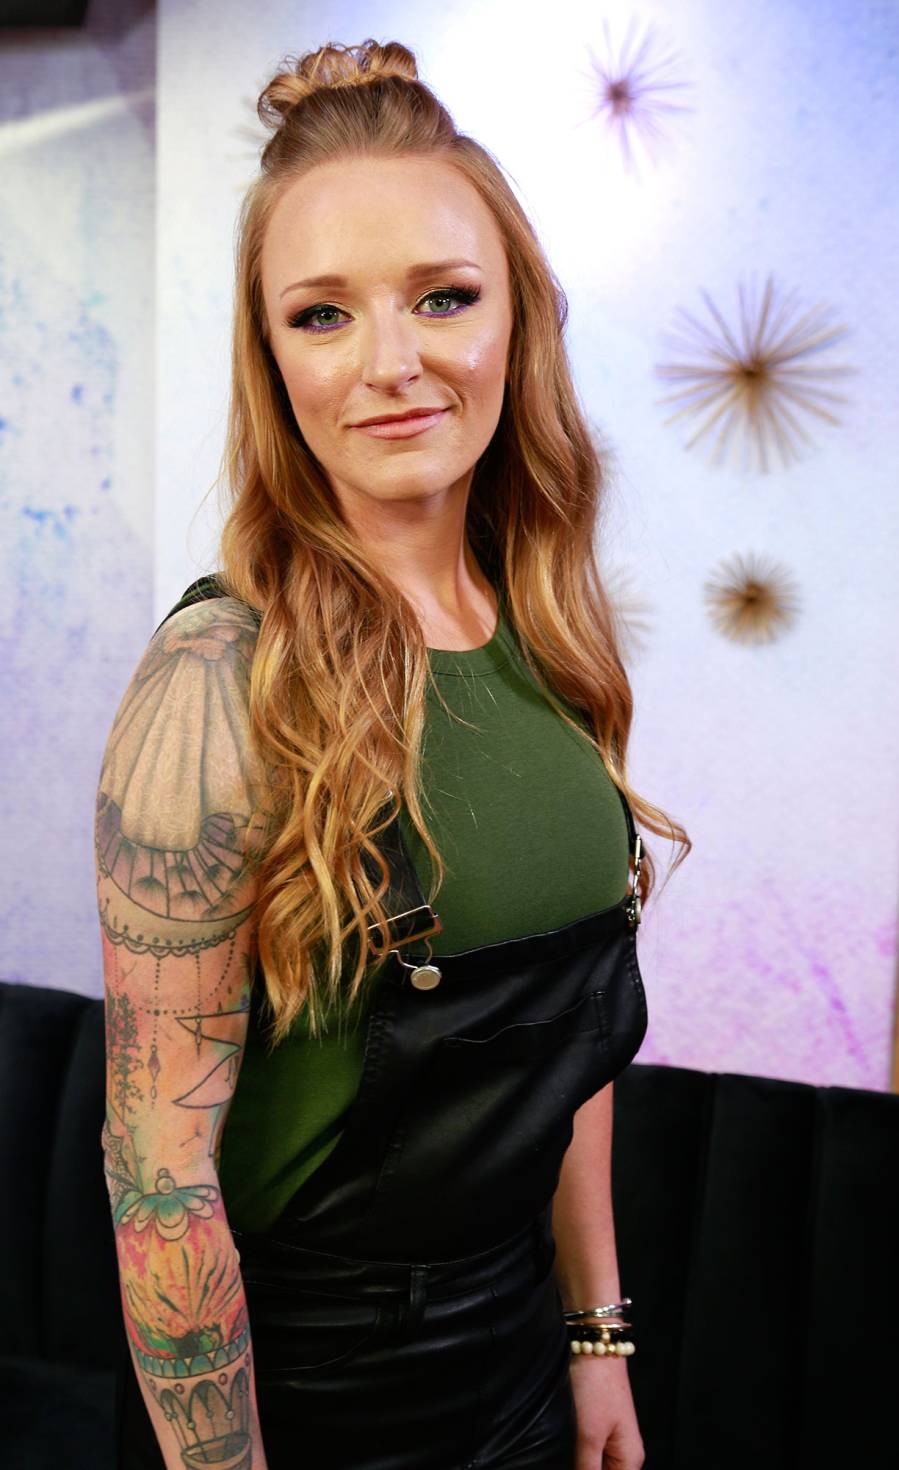 Maci Bookout Reacts to Audio of Amber Portwood Allegedly Assaulting Andrew Glennon